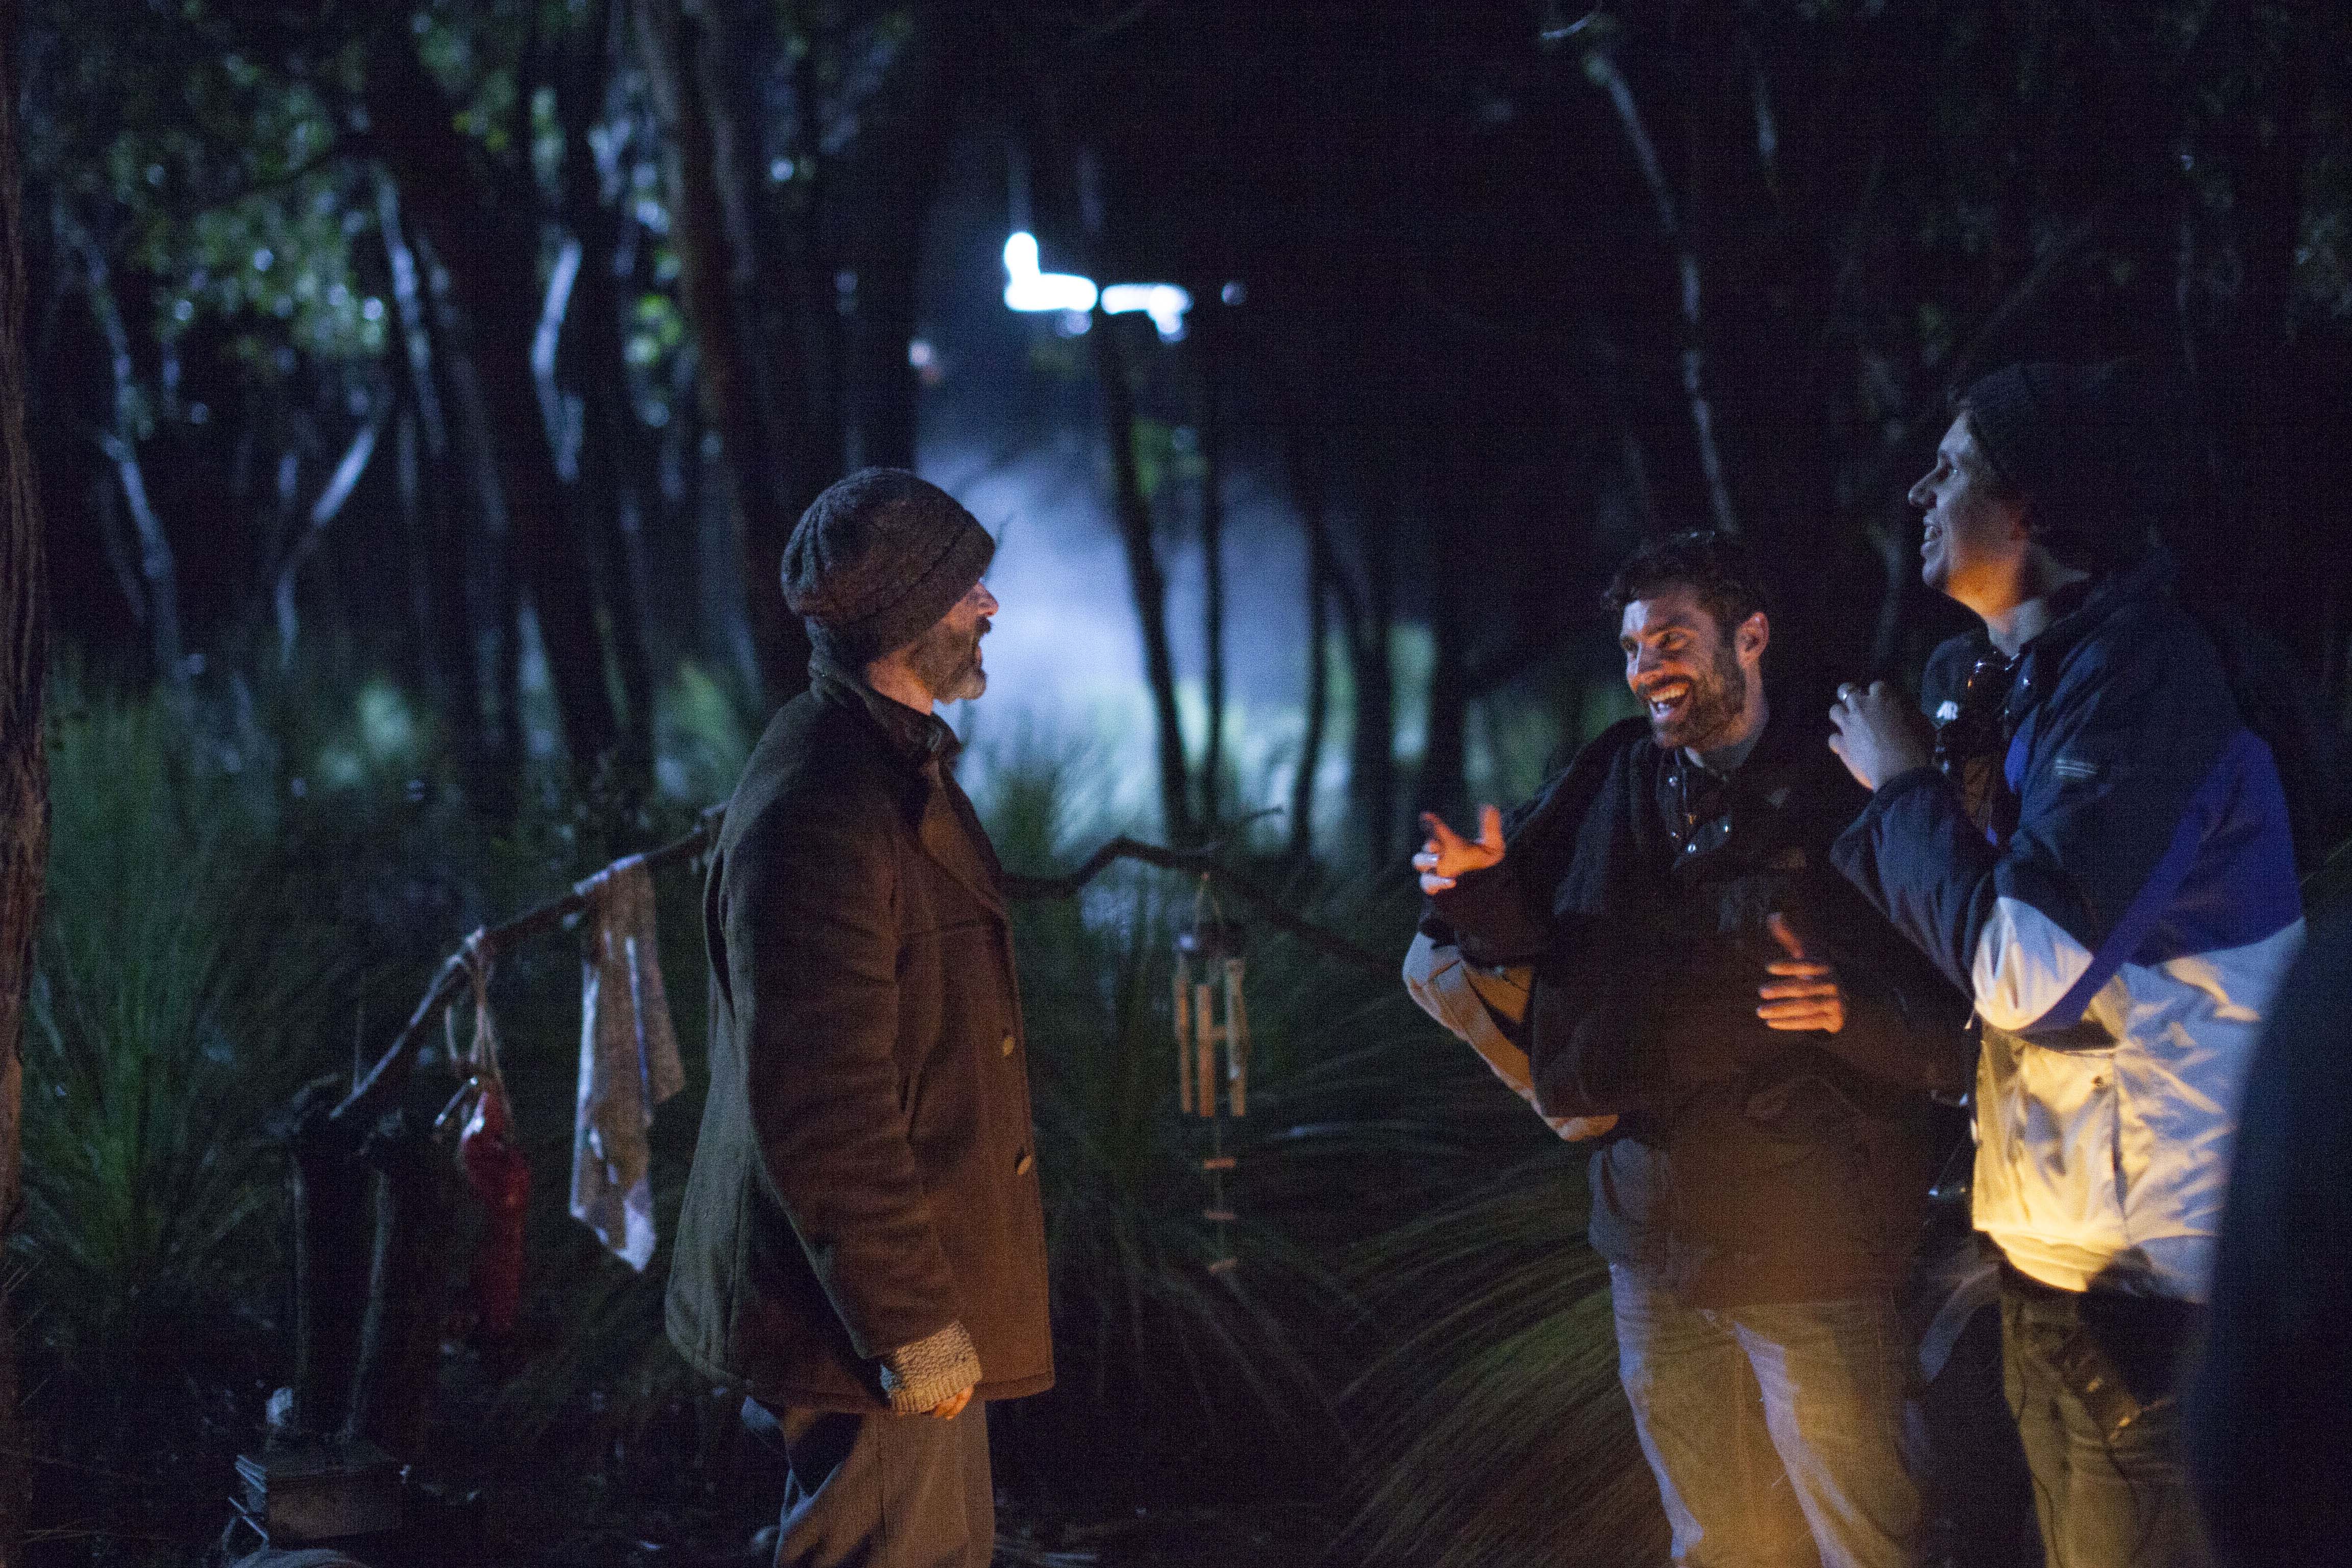 Jesse Leaman, Guy Pearce and Michael Wylam on the set of Lorne